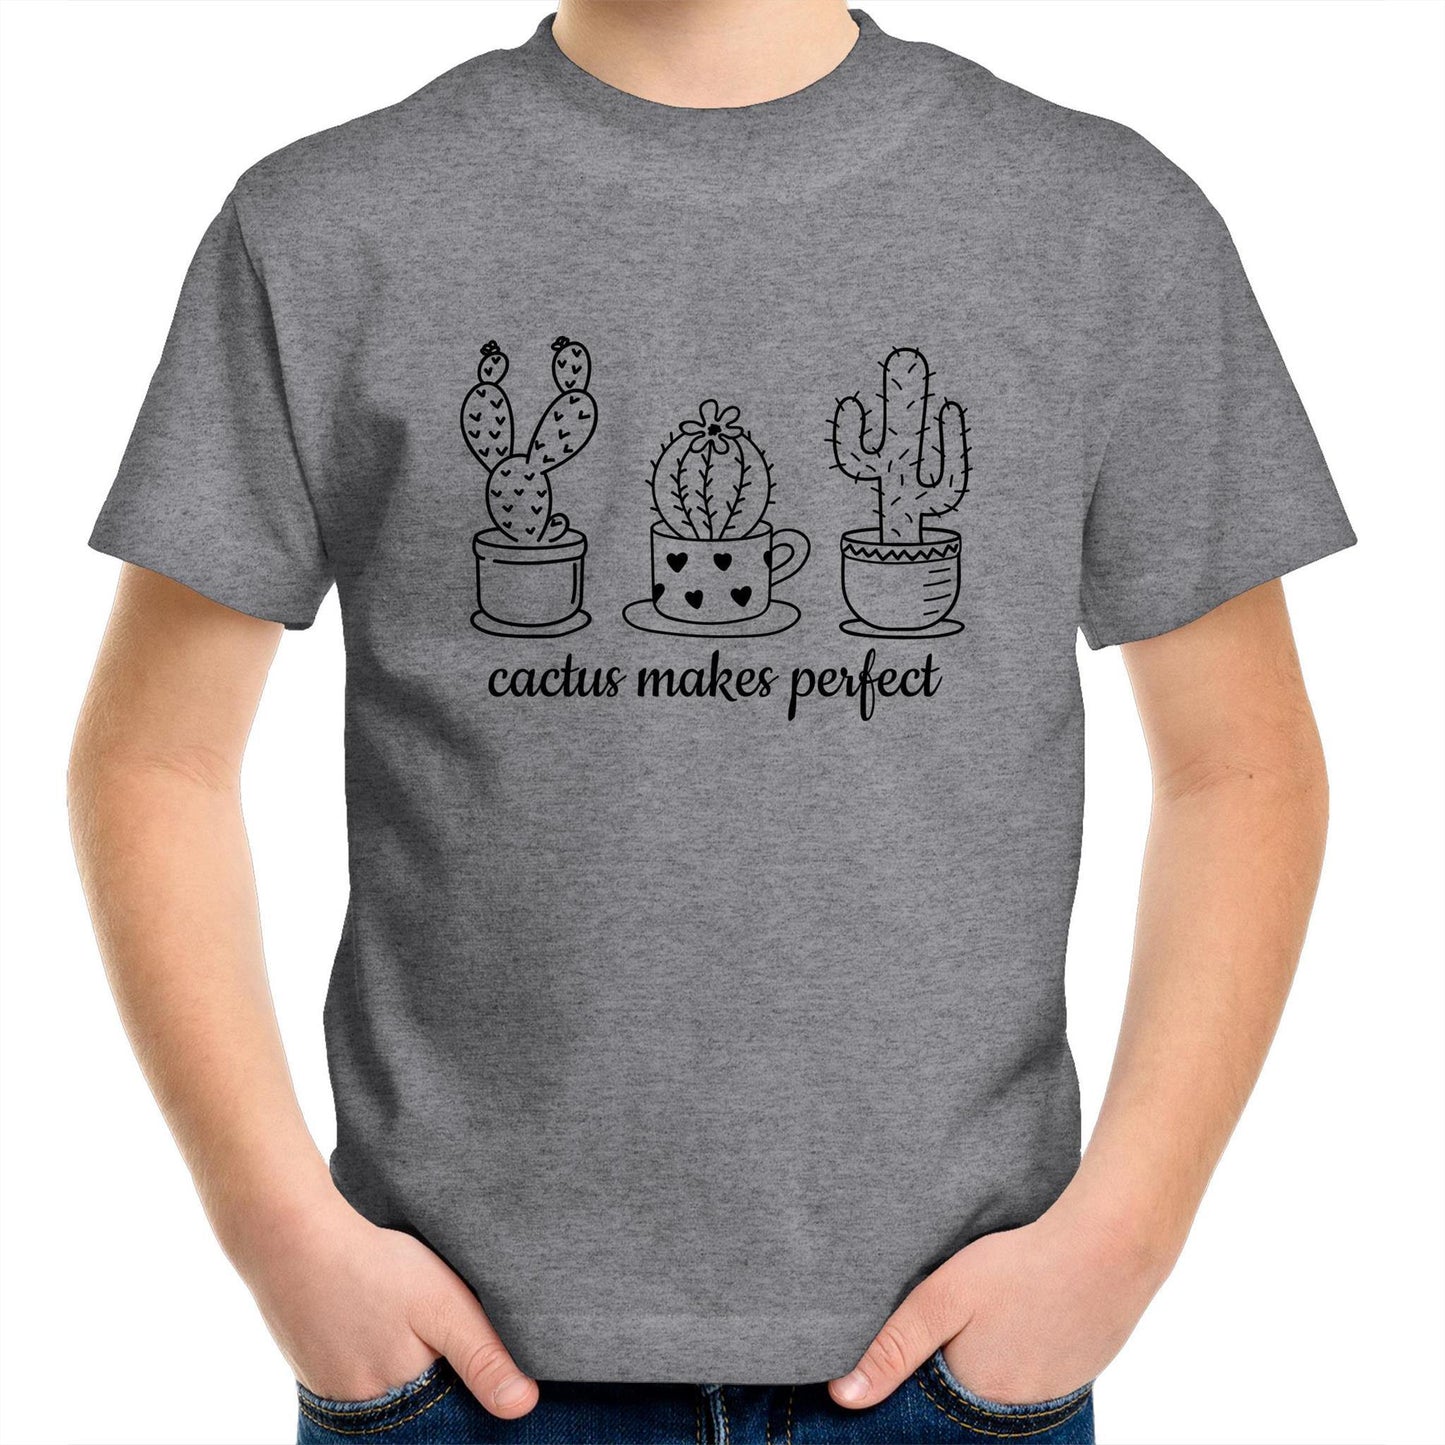 Cactus Makes Perfect - Kids Youth Crew T-Shirt Grey Marle Kids Youth T-shirt Plants